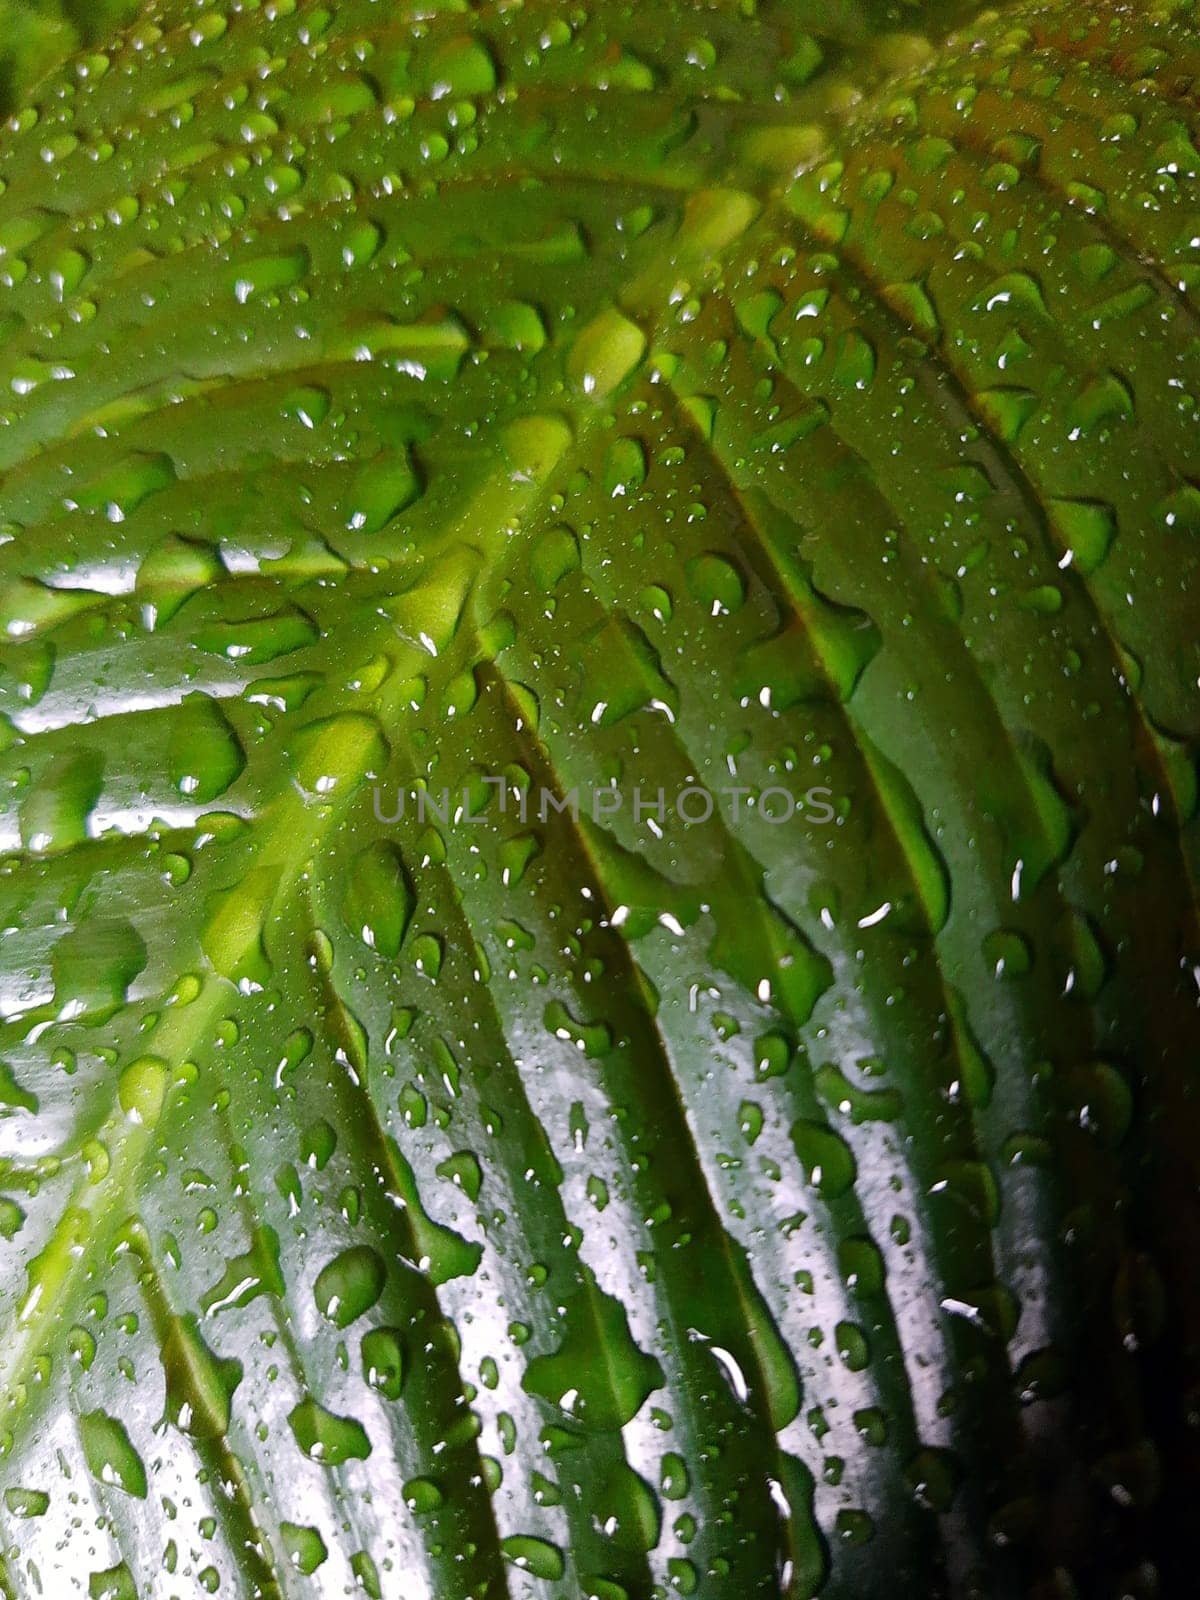 Drops on green leaves of spathiphyllum in spring close-up.